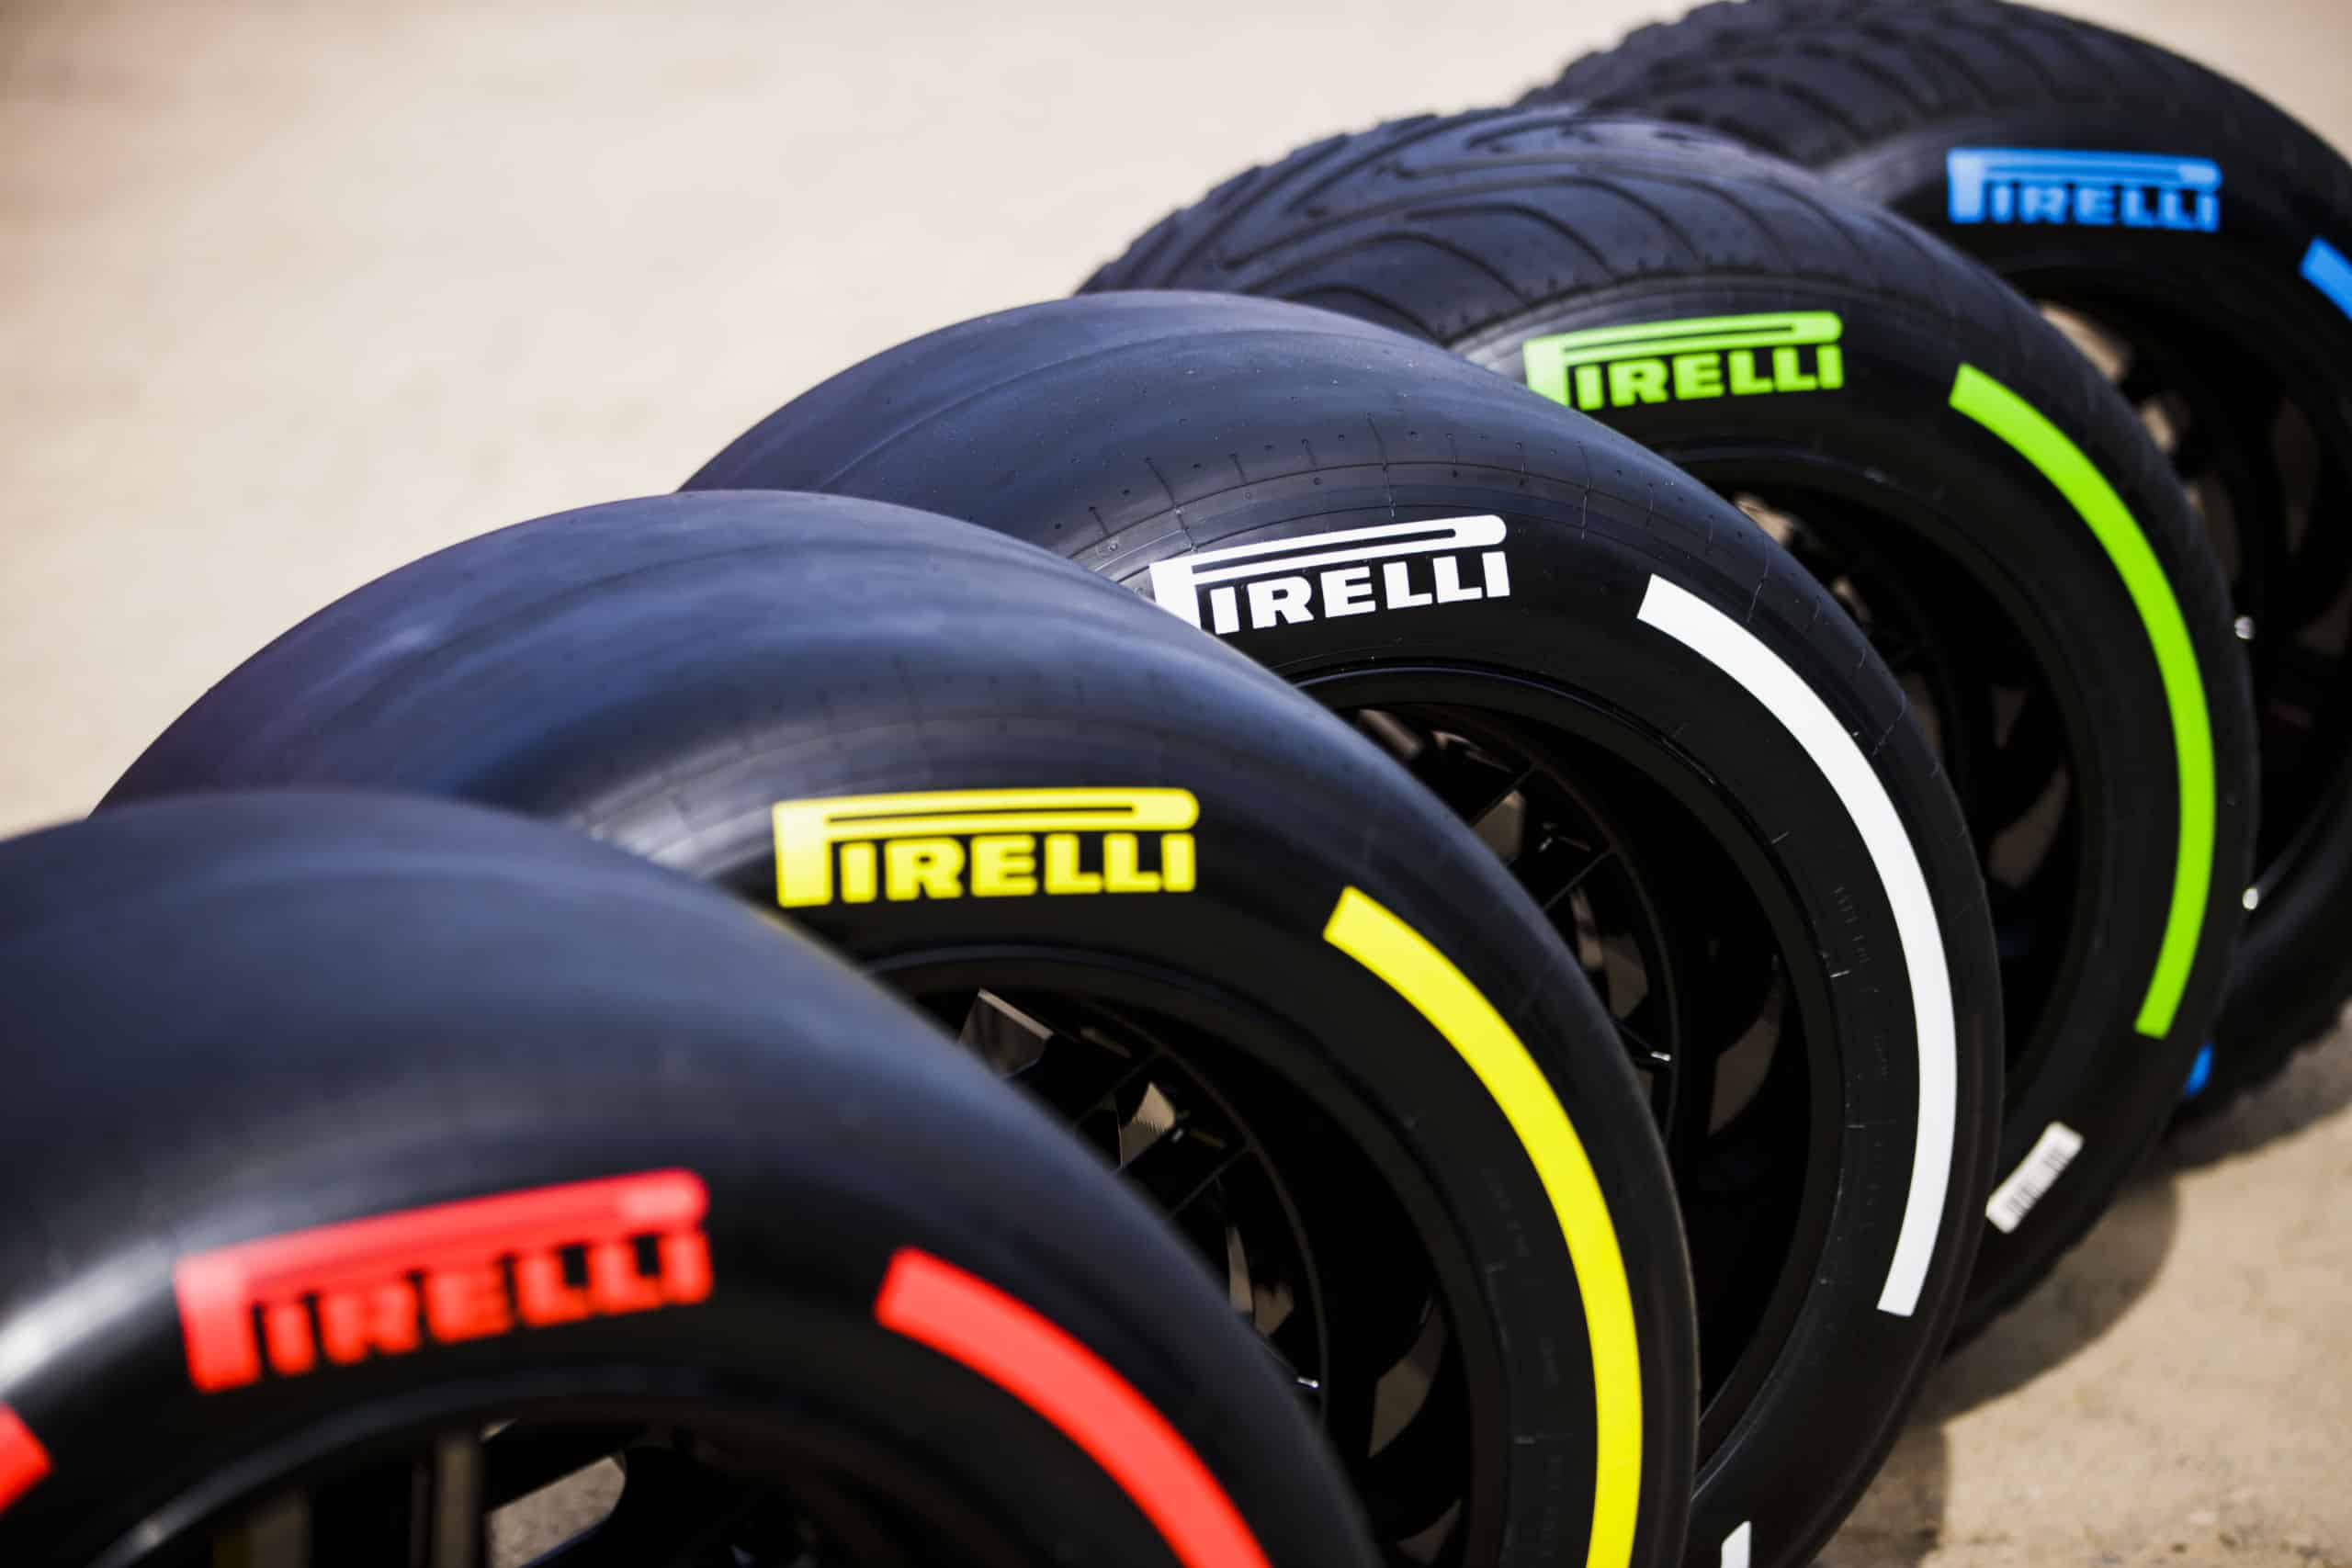 Explained: Pirelli F1 Tyre Compounds - Fueler store